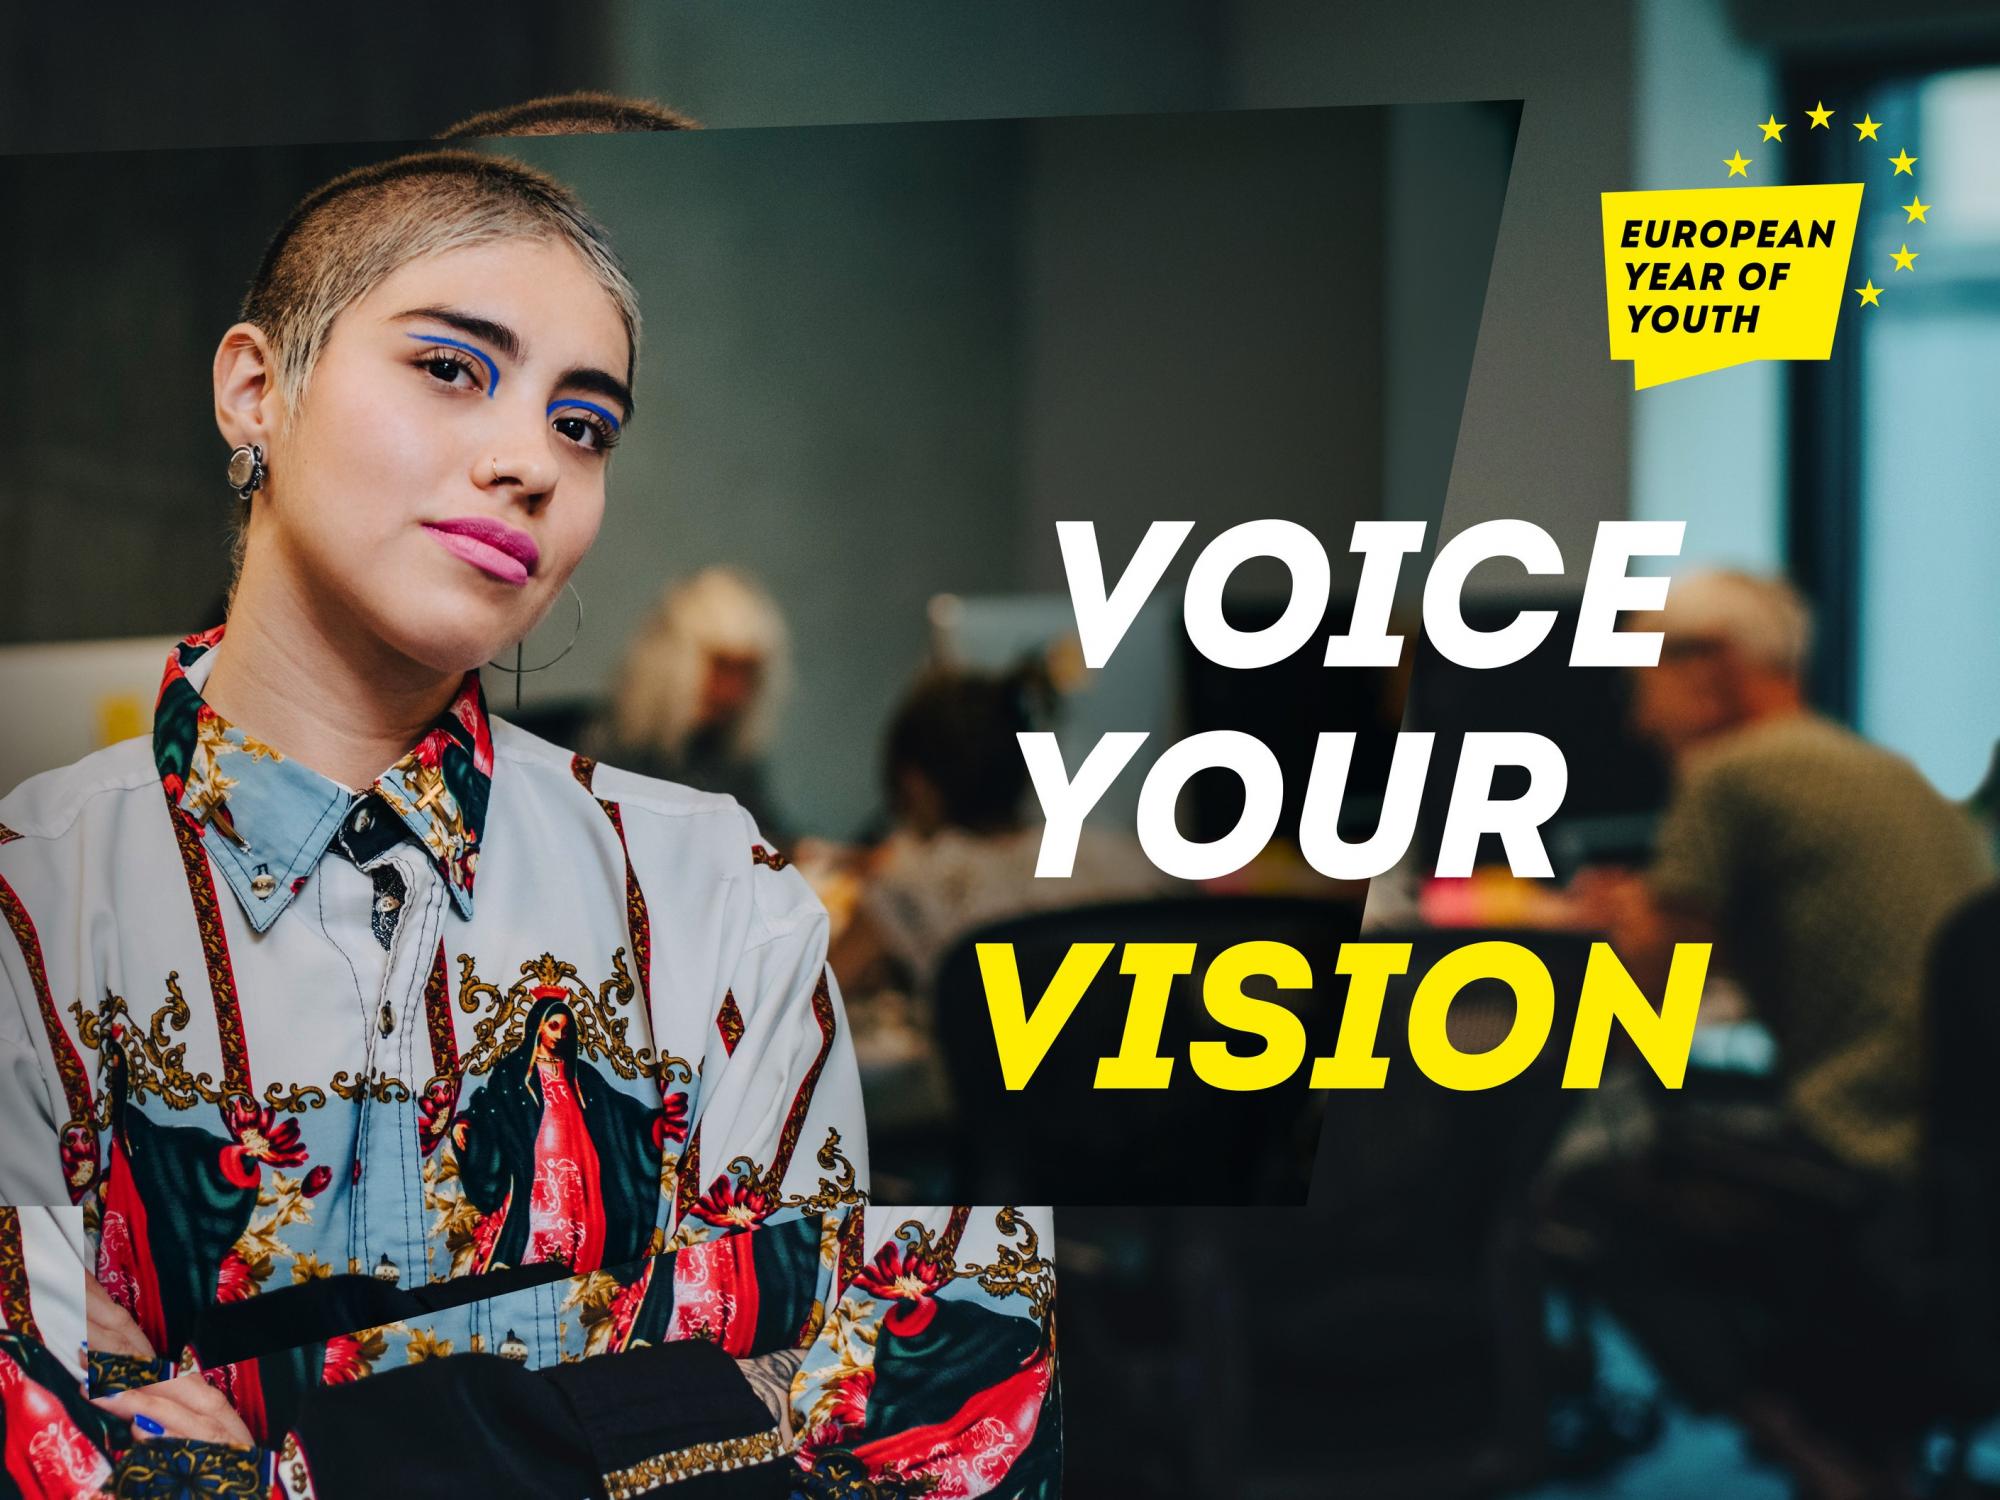 European Year of Youth: Voice your vision